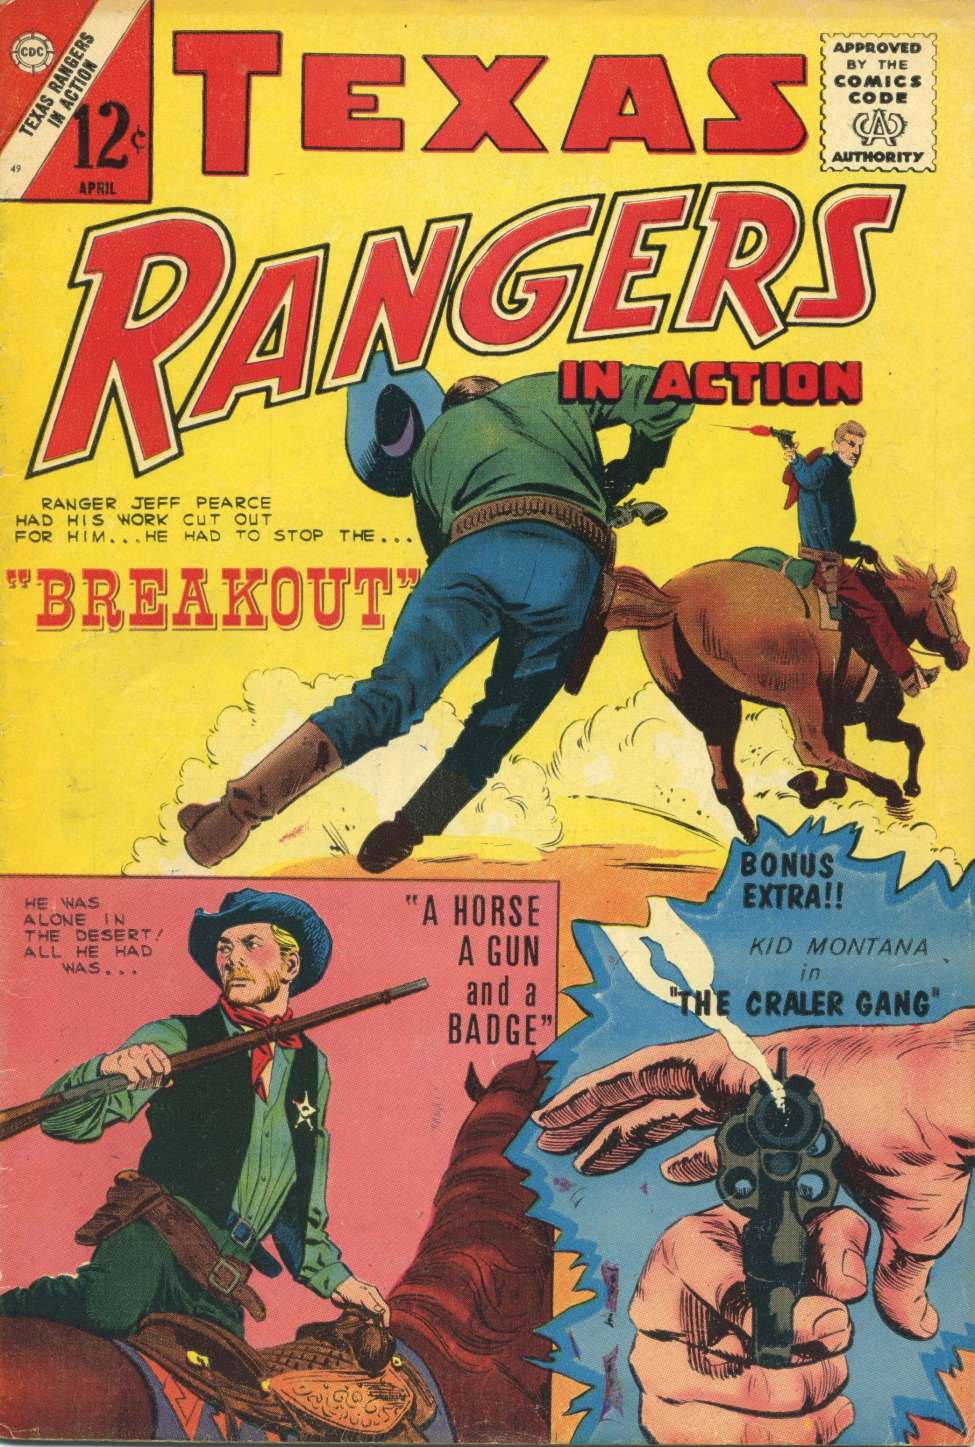 Book Cover For Texas Rangers in Action 49